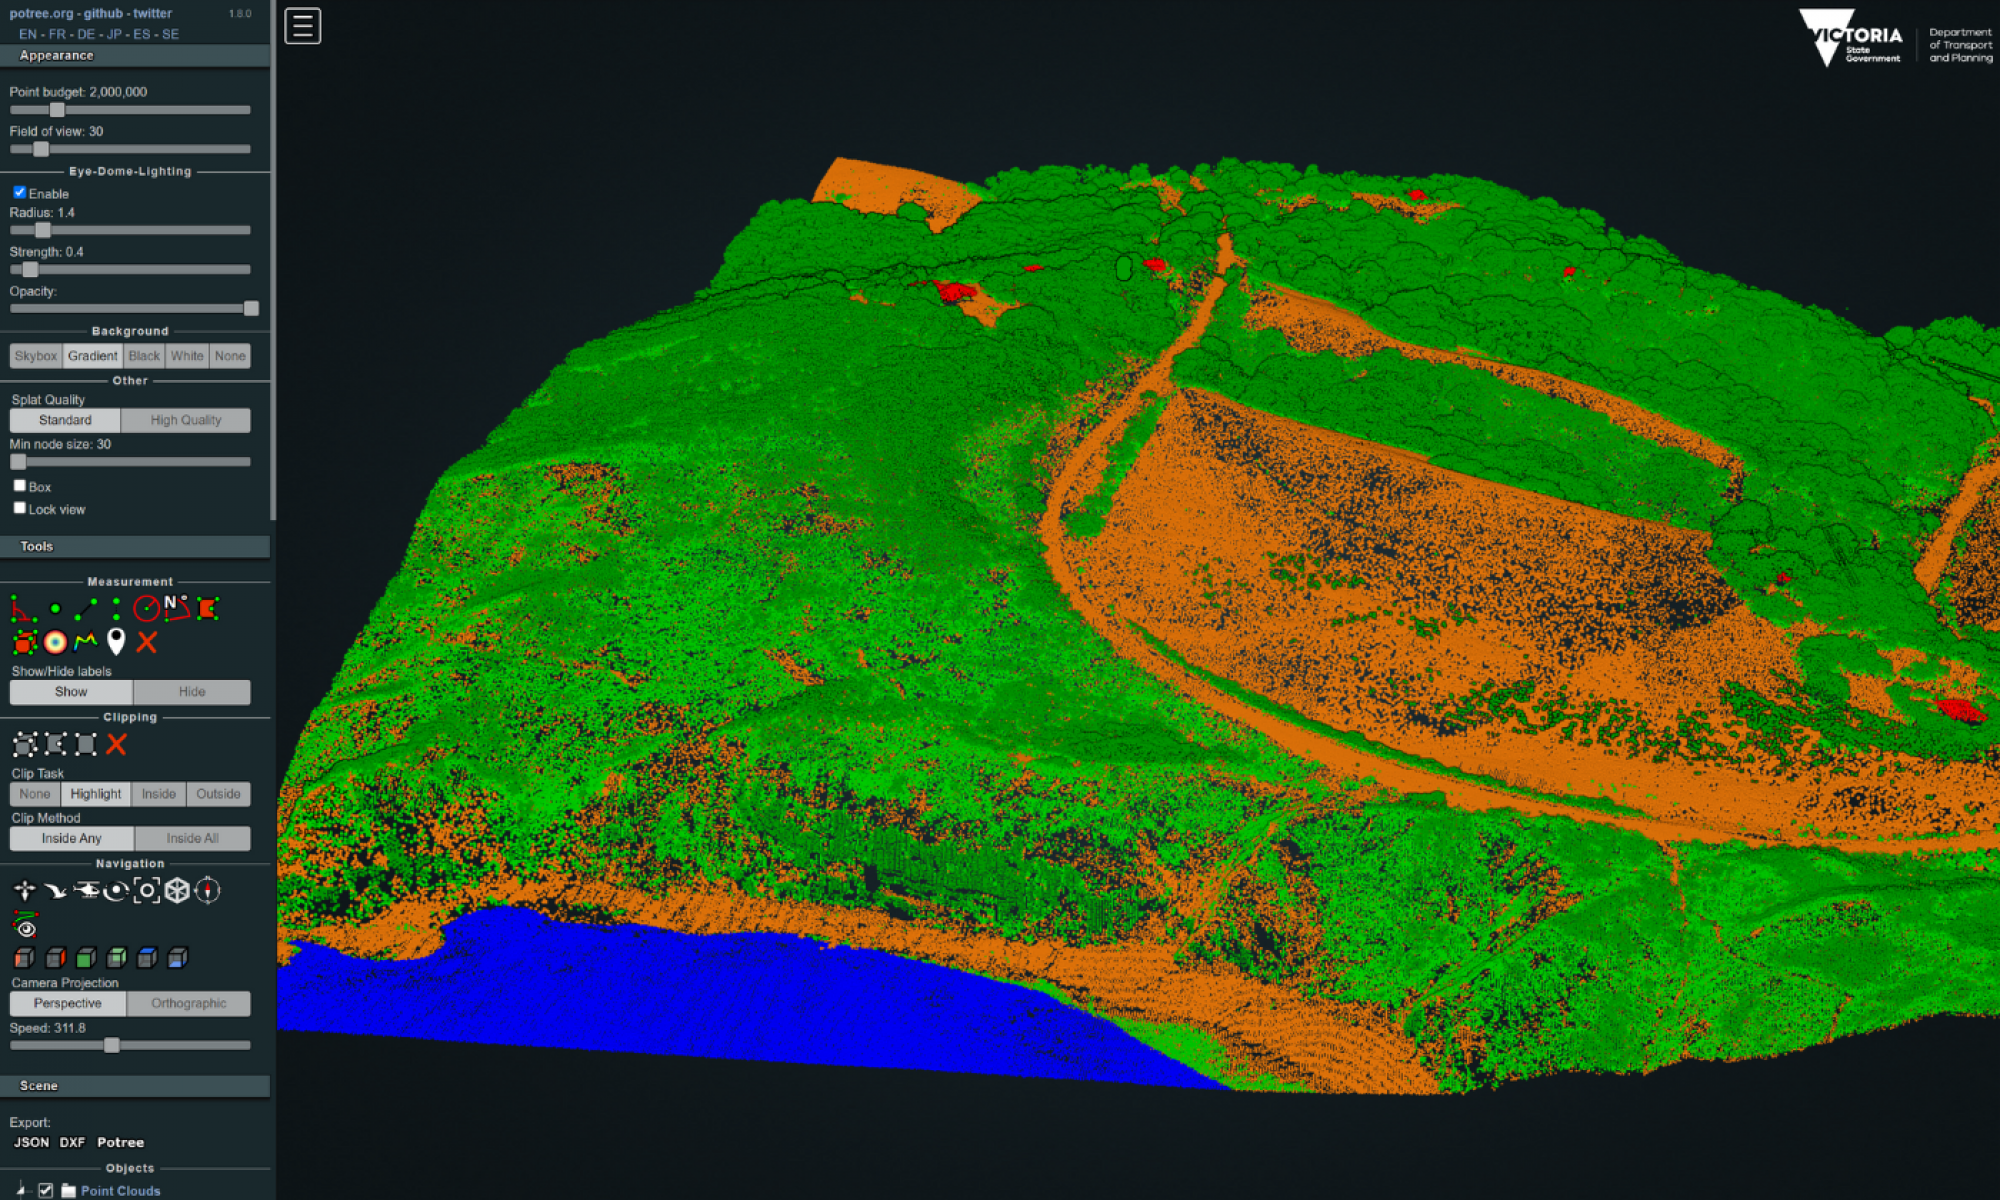 A screen capture of the web browser preview of Great Ocean Road LiDAR data. A menu on the left hand side shows options to customise the data. The main screen shows terrain in shades of orange, vegetation in green, water in blue and buildings in red.